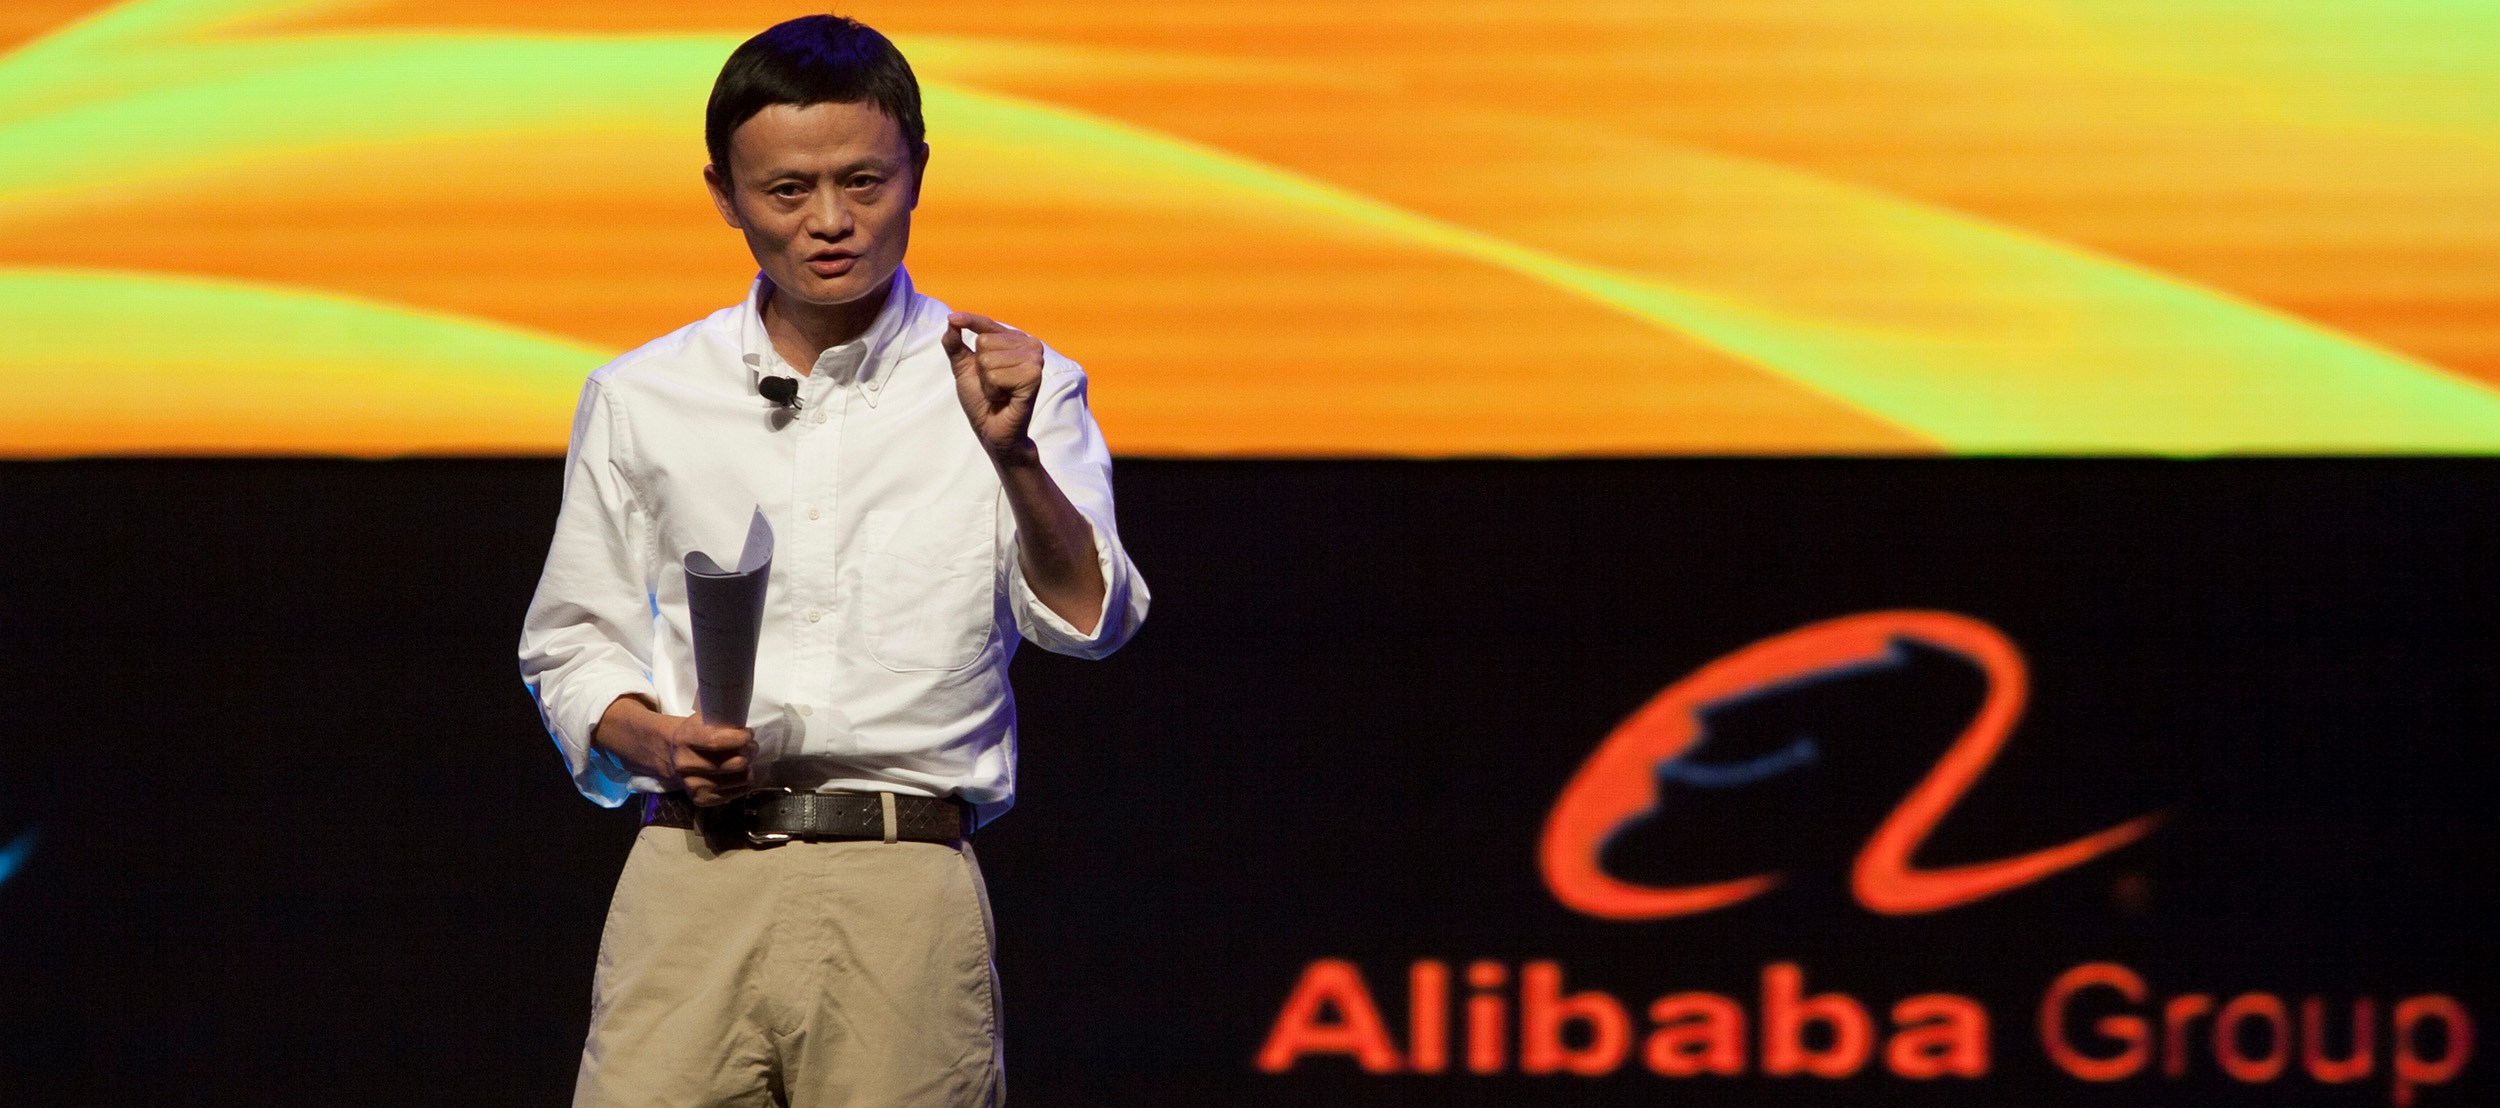 Jack Mae, founder and CEO of Alibaba.